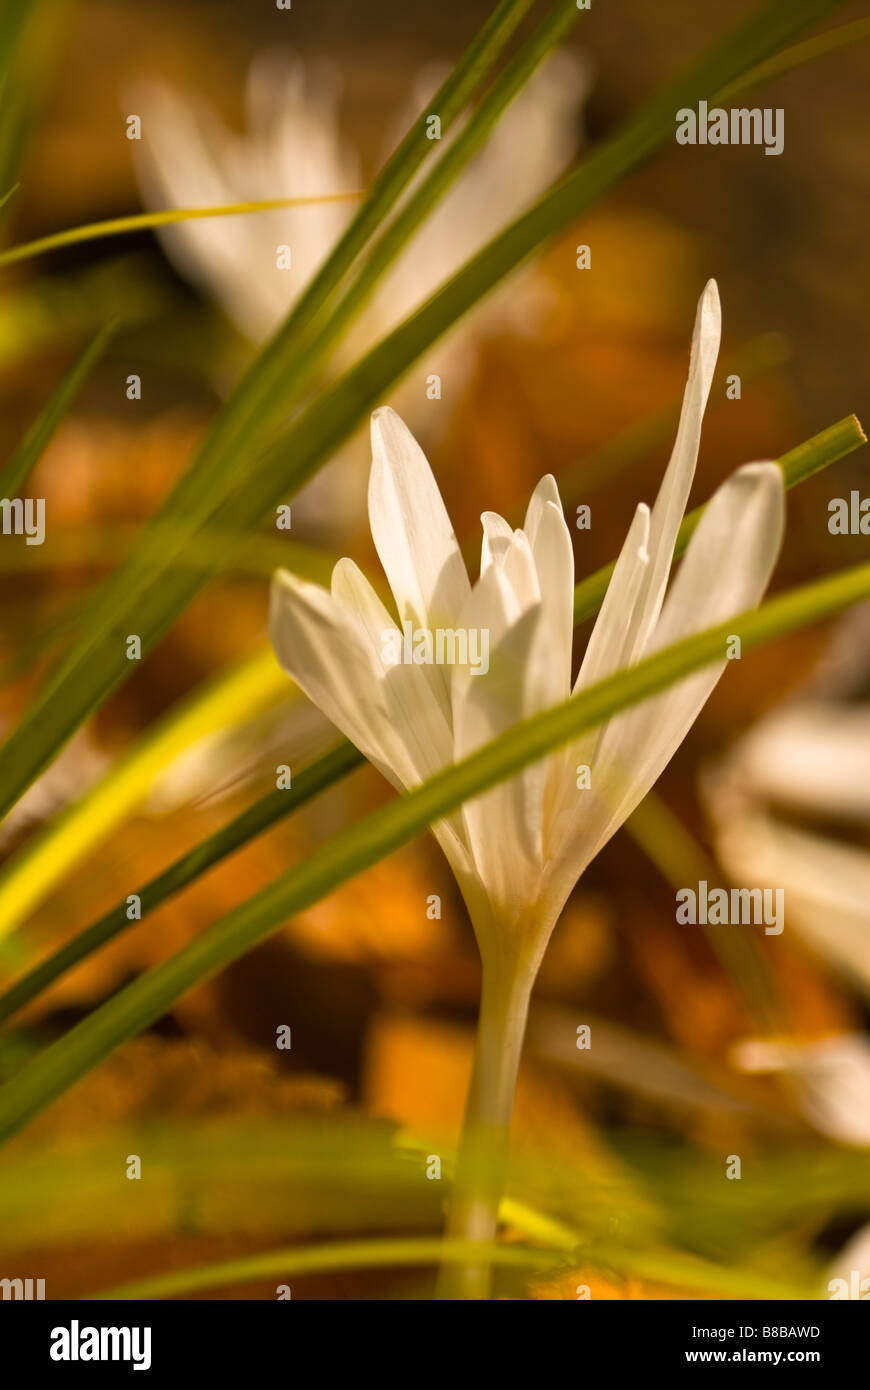 The blossom of a fall-blooming bulb, Colchicum autumnale. This is the less common white form 'Alboplenum'. Stock Photo